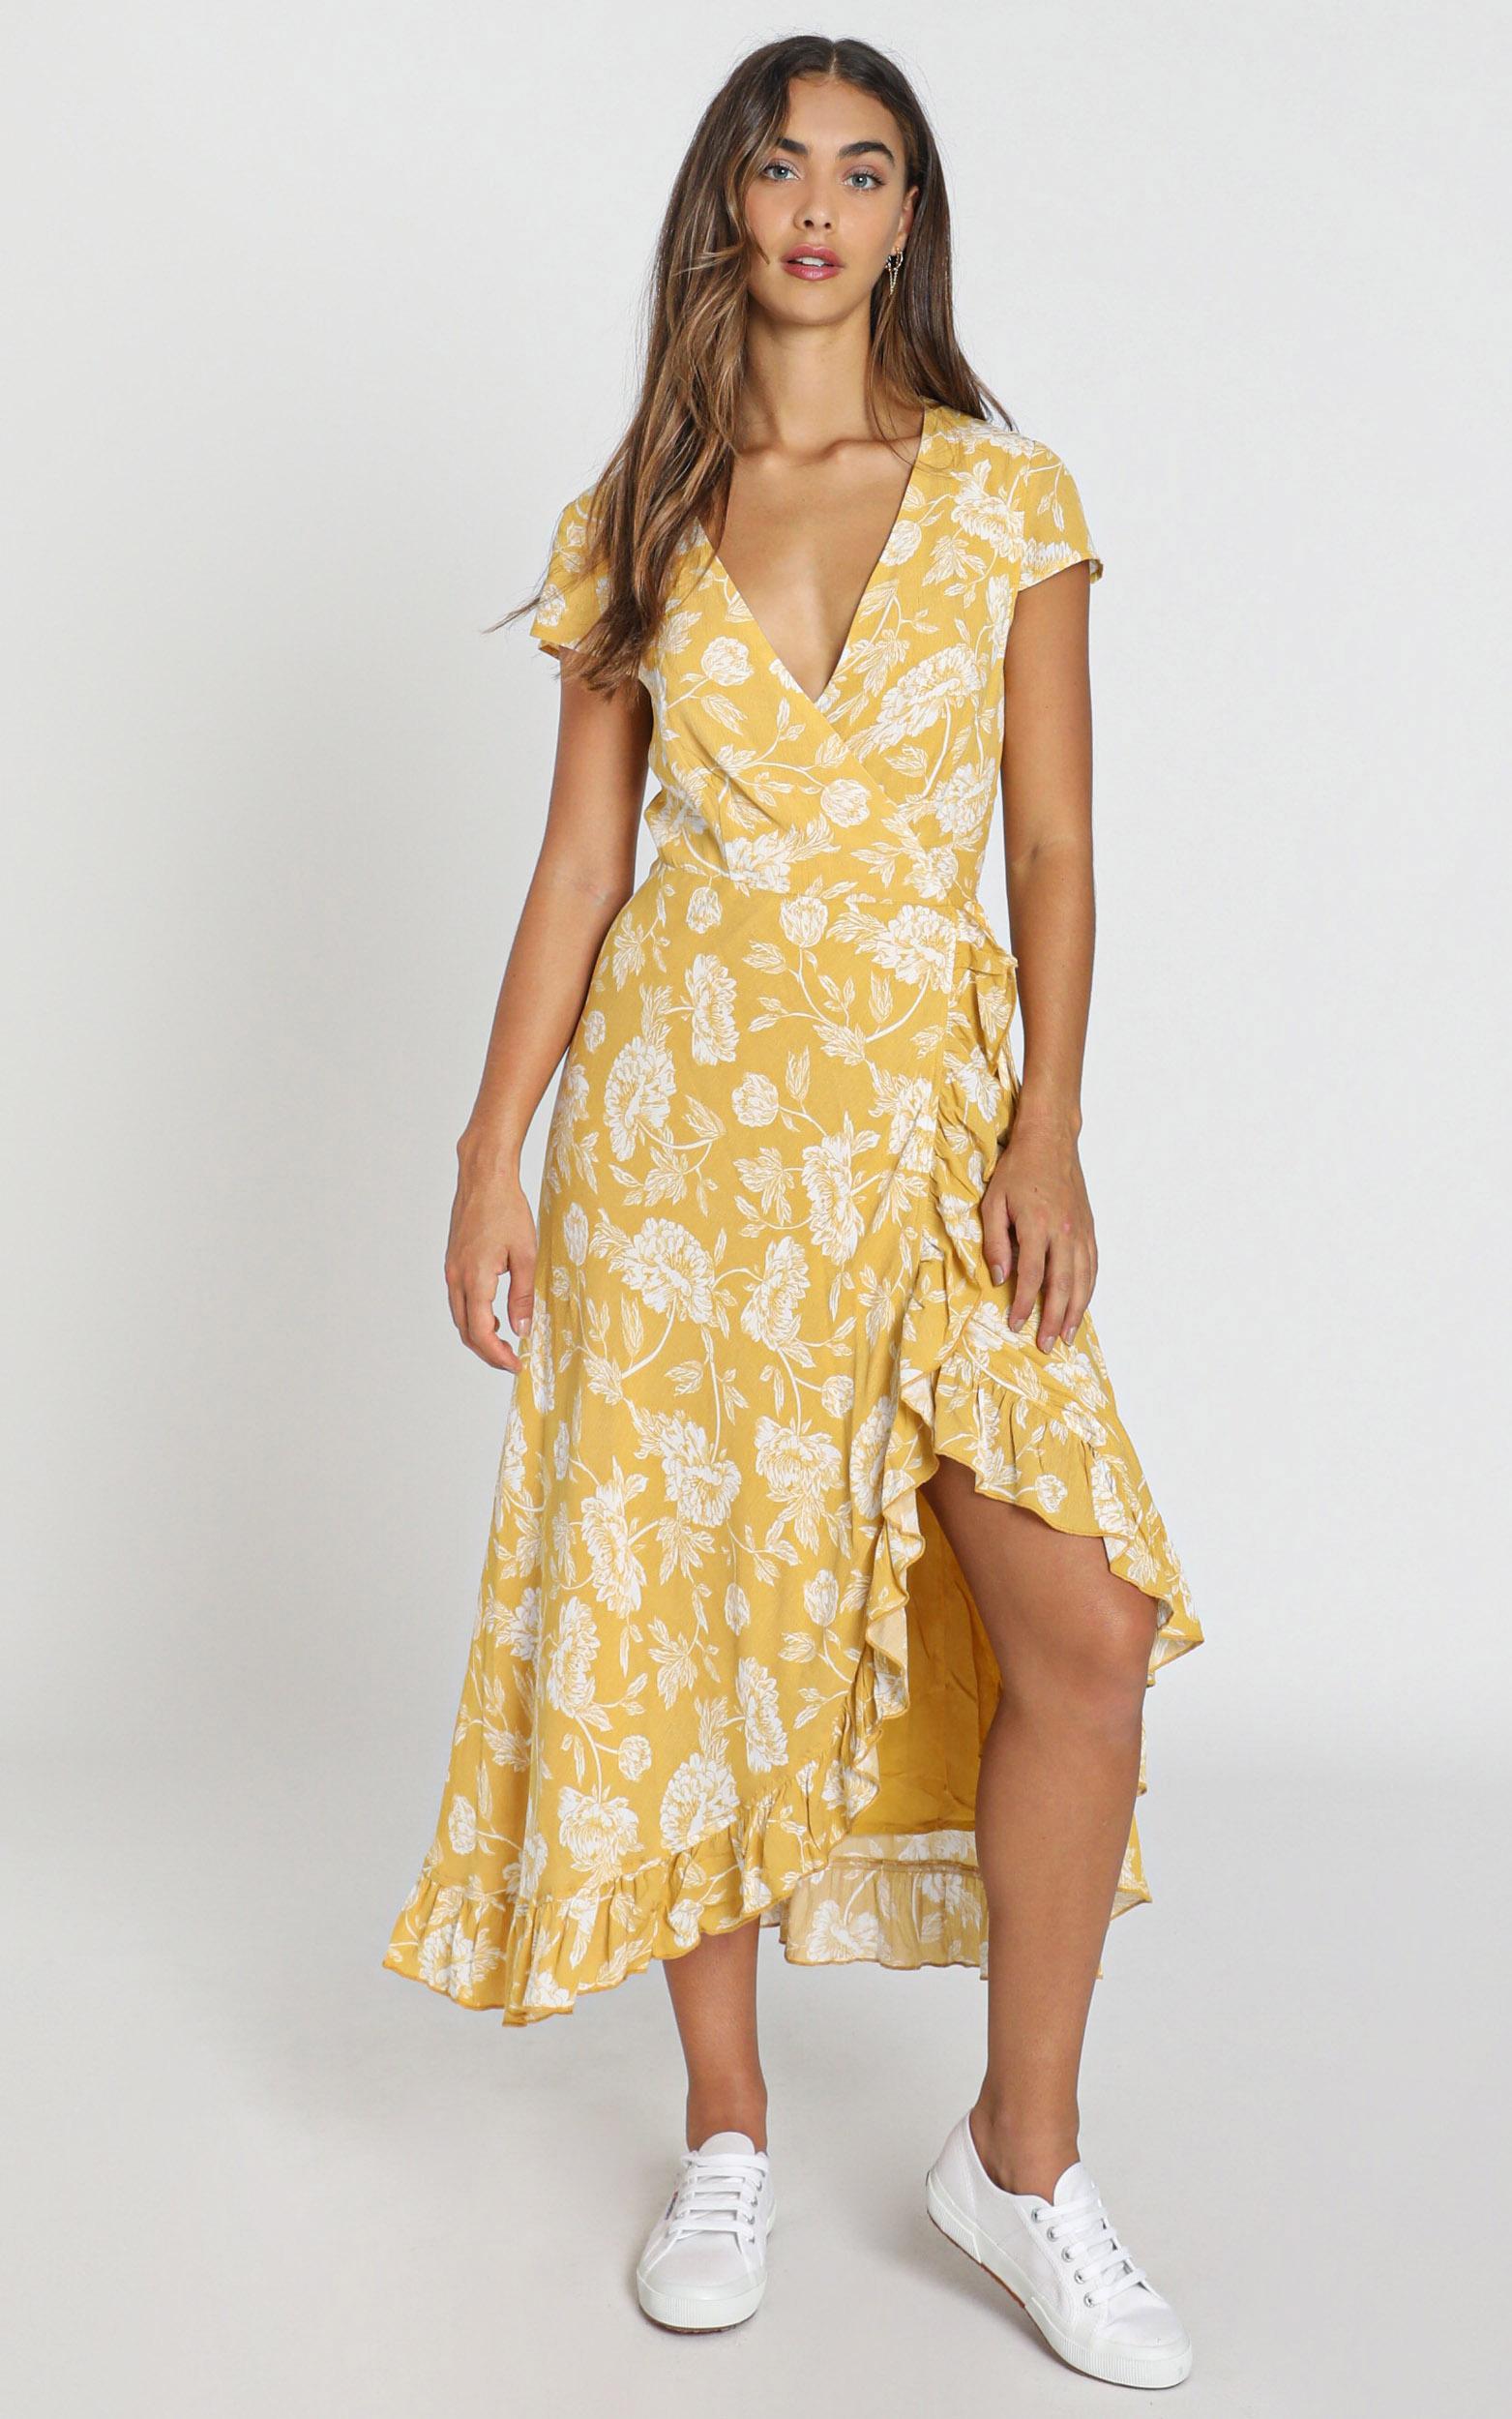 Tropical Scenes Dress in Yellow Floral ...